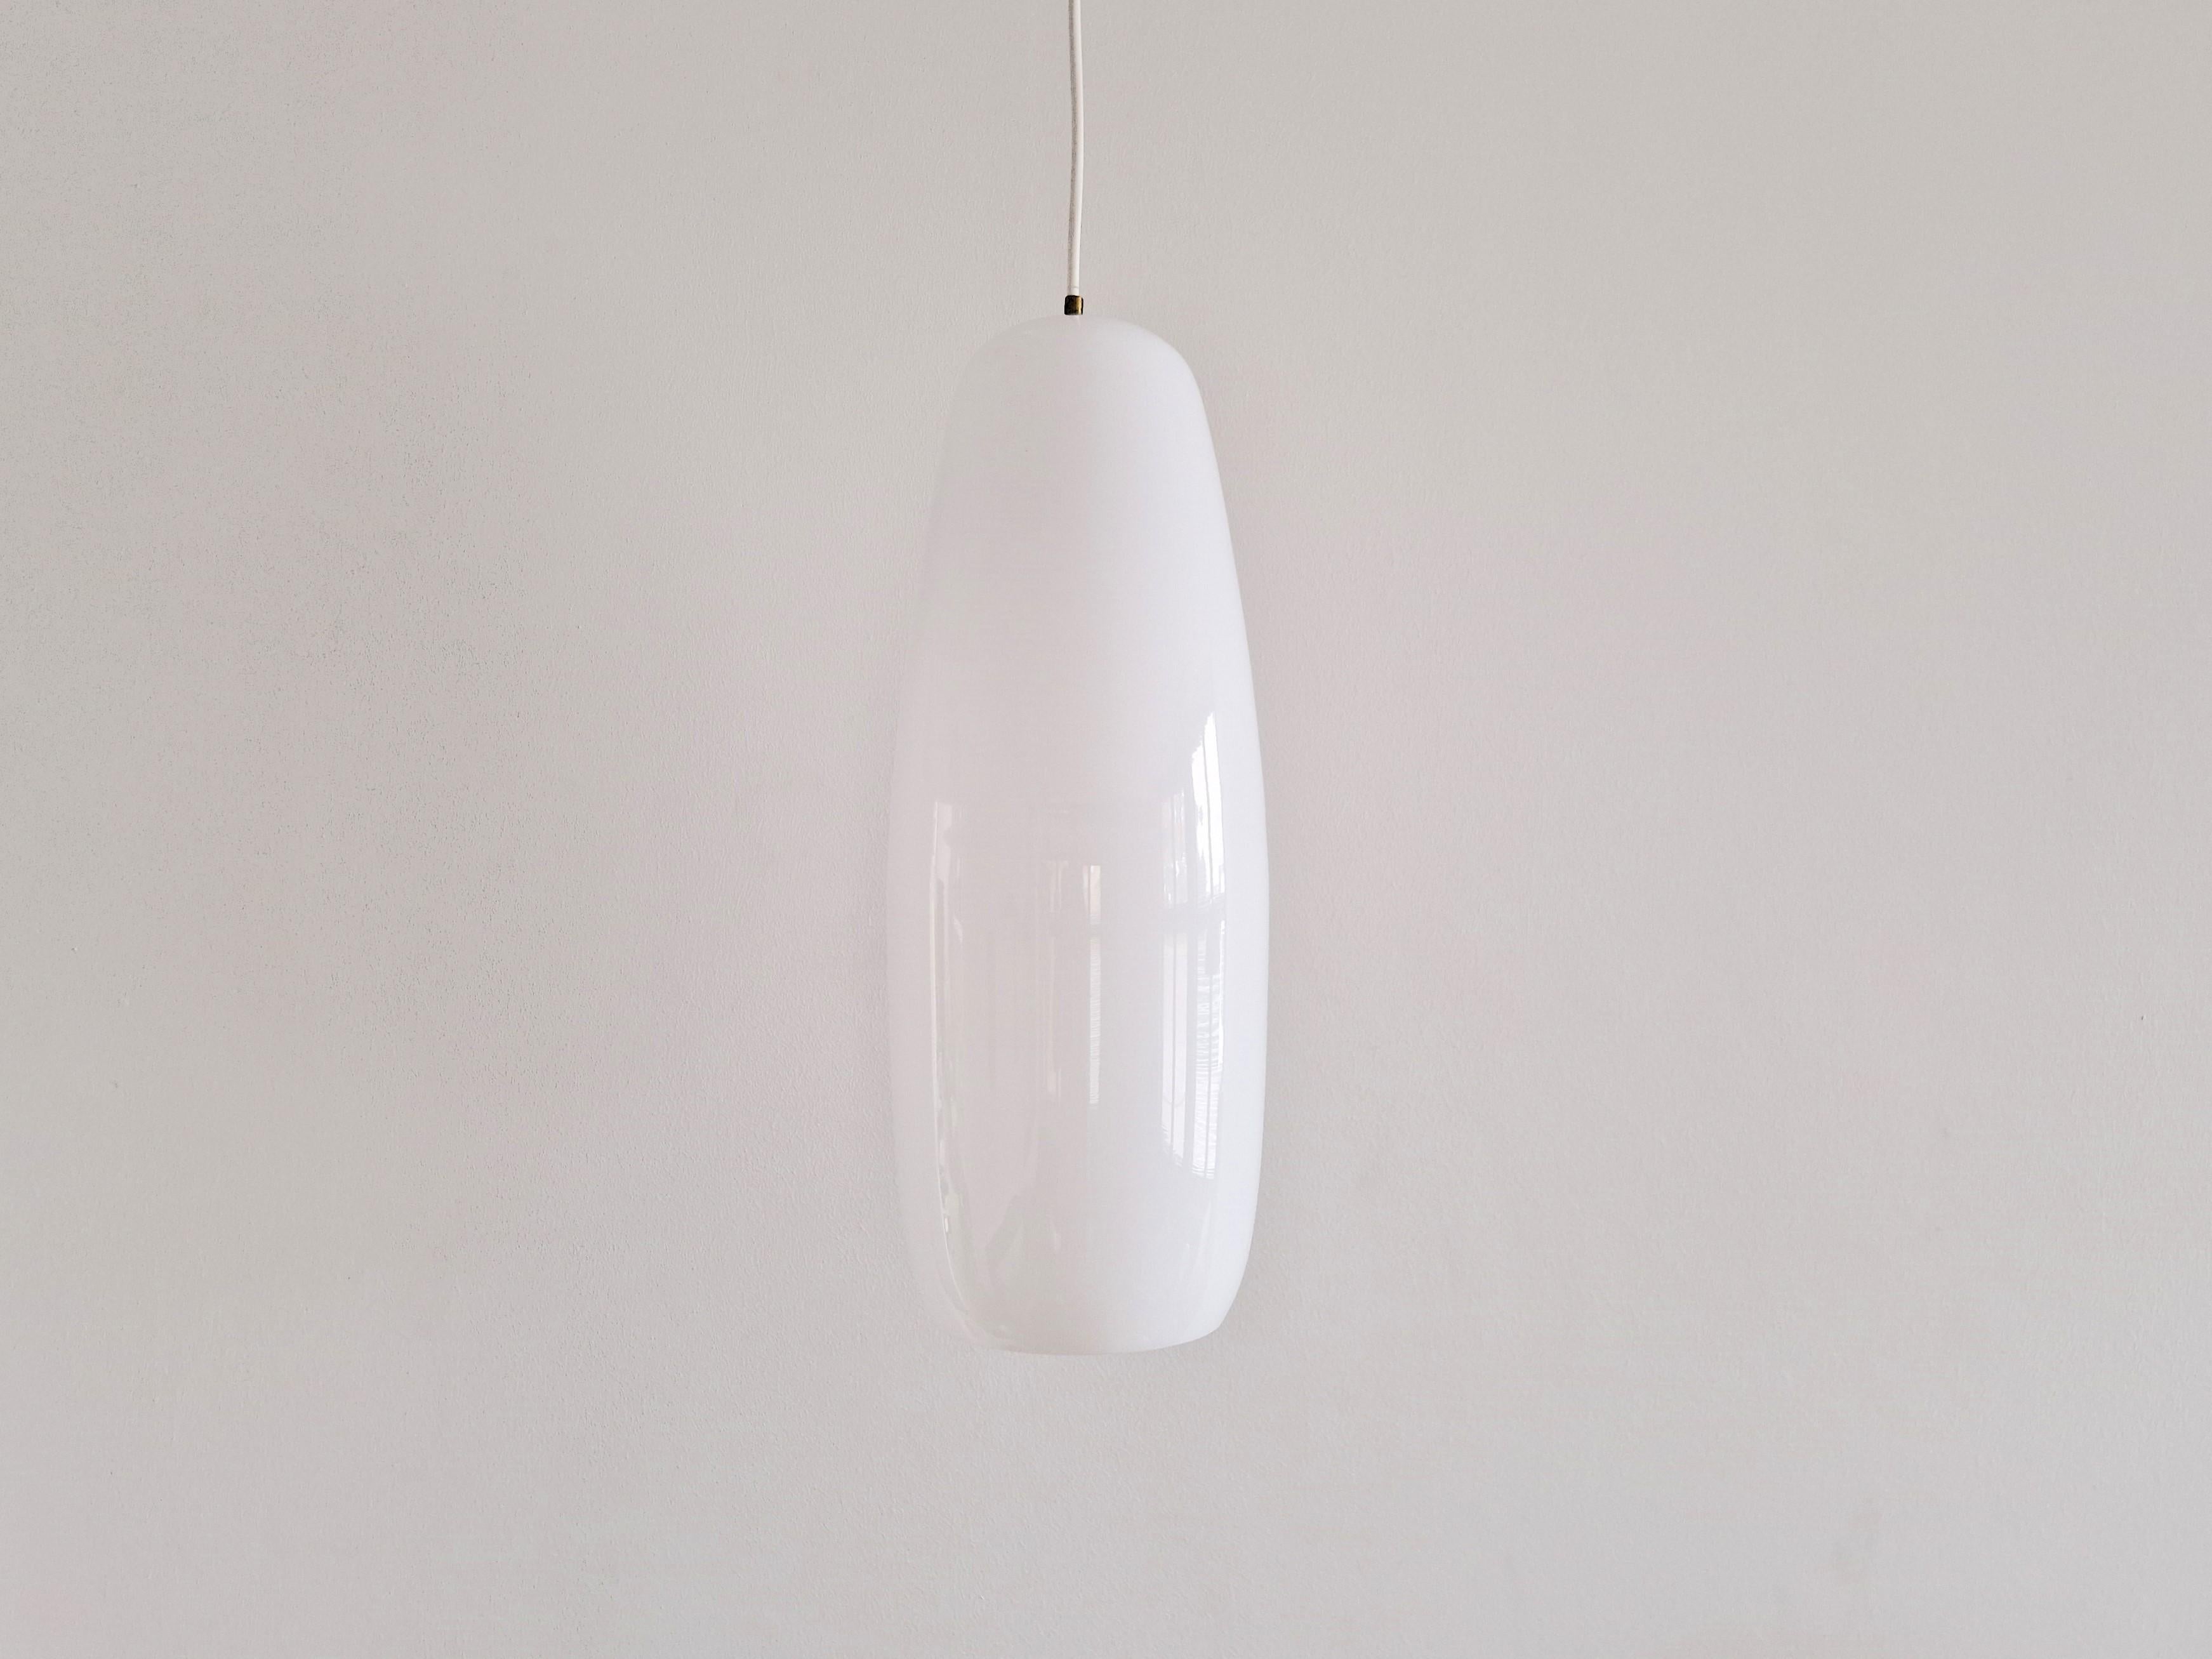 This large white blown glass pendant lamp was designed by Massimo Vignelli for Venini in the 1960's. It was made in 2 sizes with a height of 35 cm and 51 cm. This lamp is the large and more rare version of 51cm. It is made of beautiful white Murano